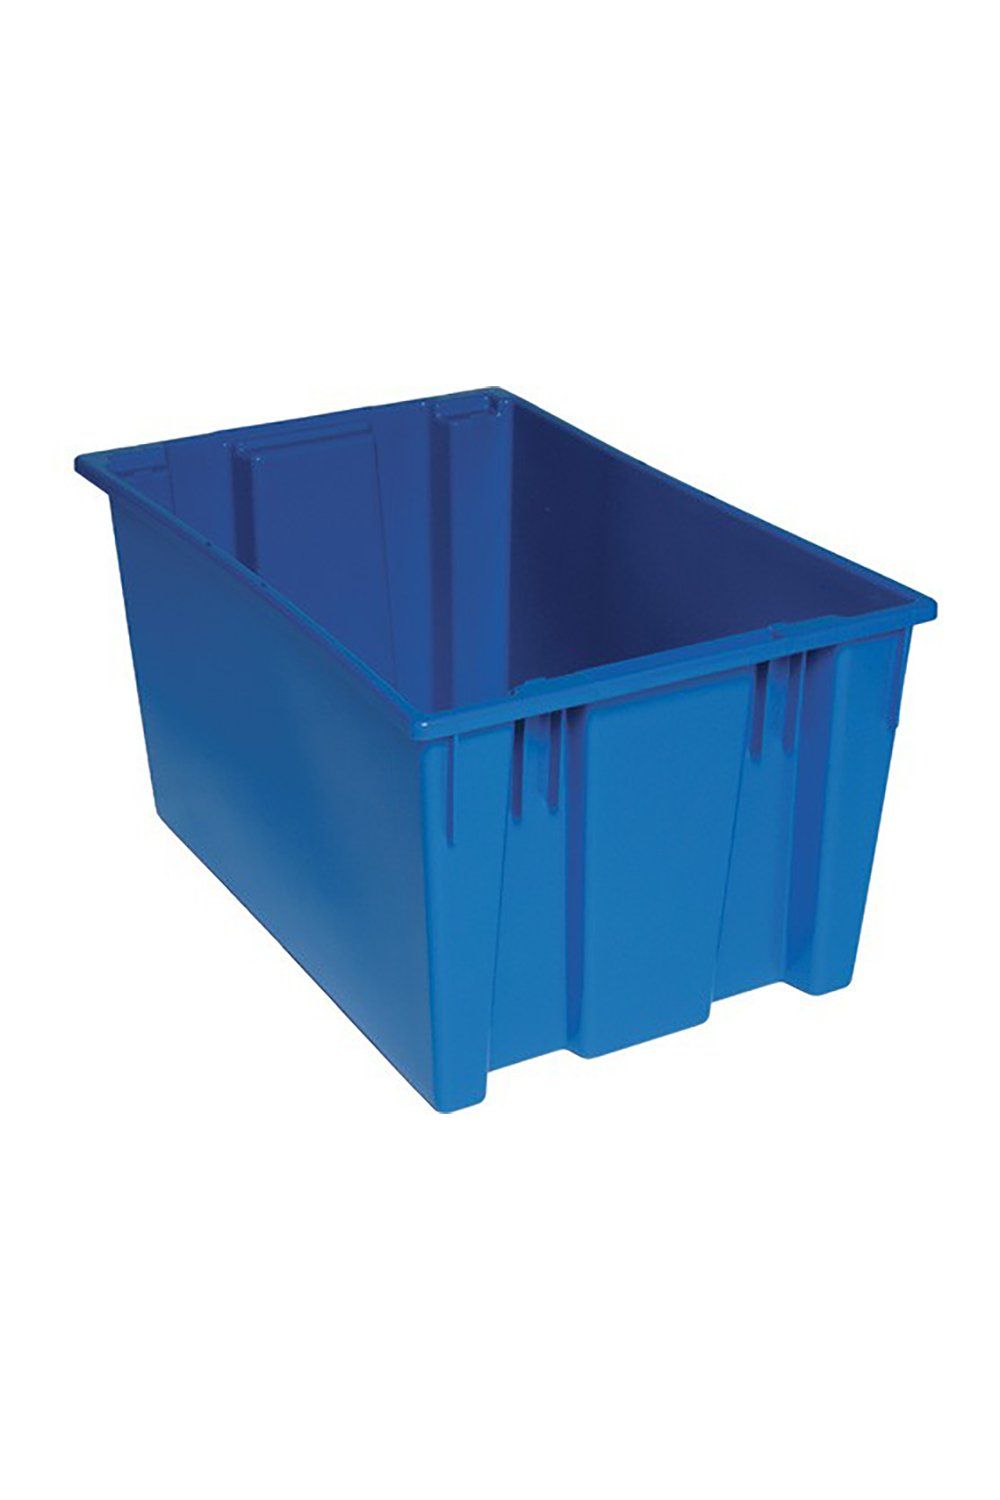 Stack and Nest Tote Bins & Containers Acart 29-1/2"L x 19-1/2"W x 15"H Blue 